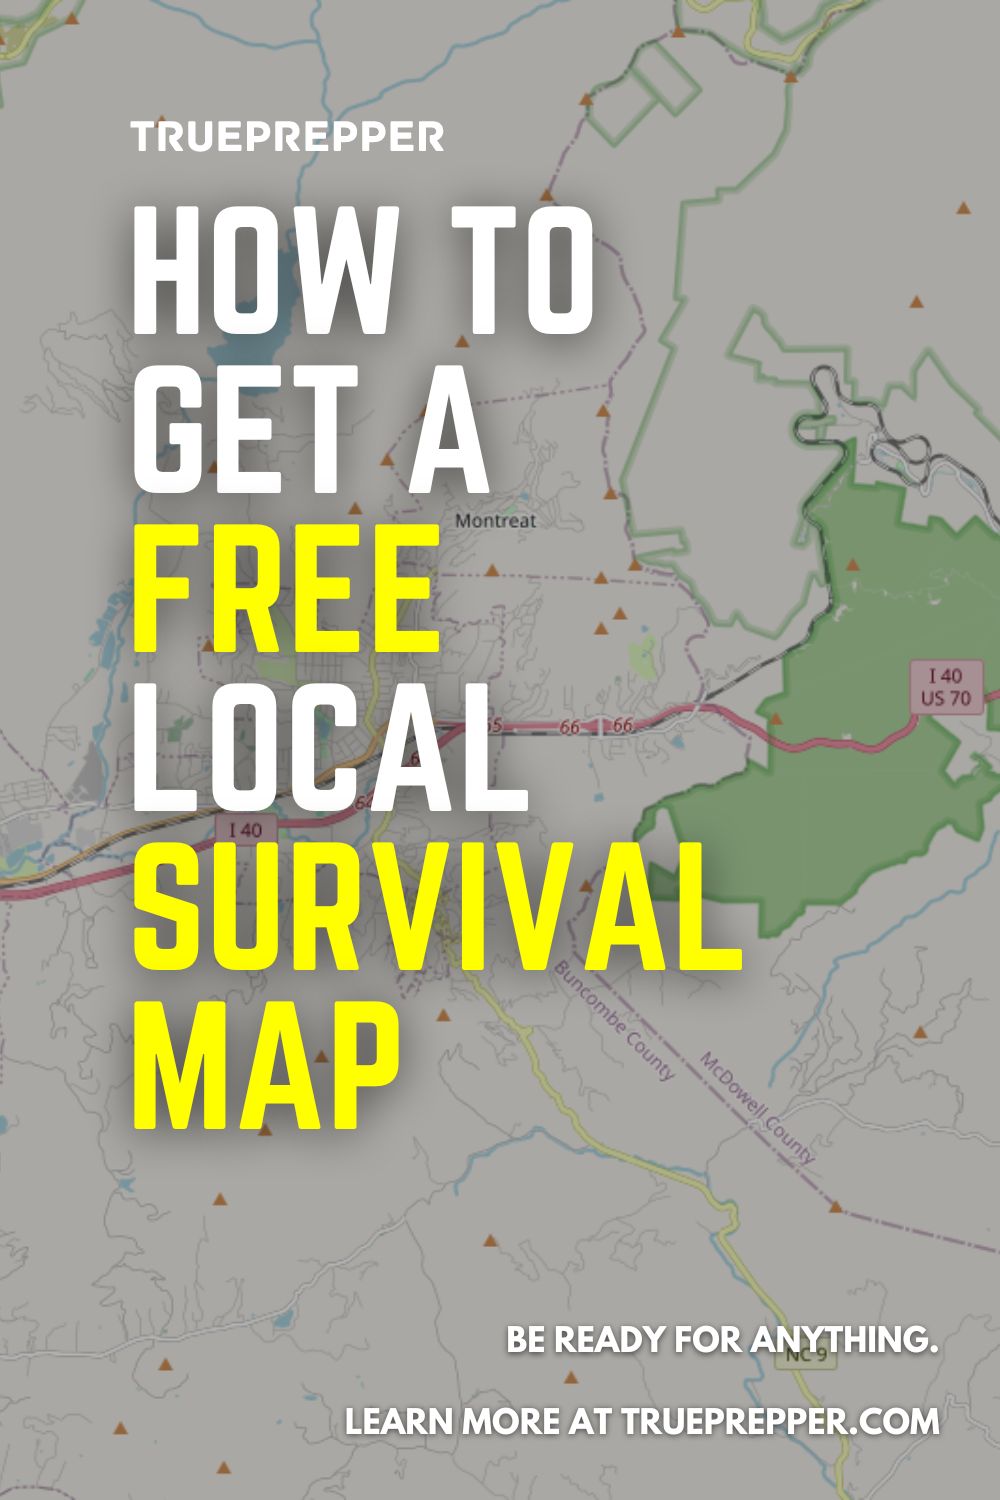 How to Get a Free Local Survival Map